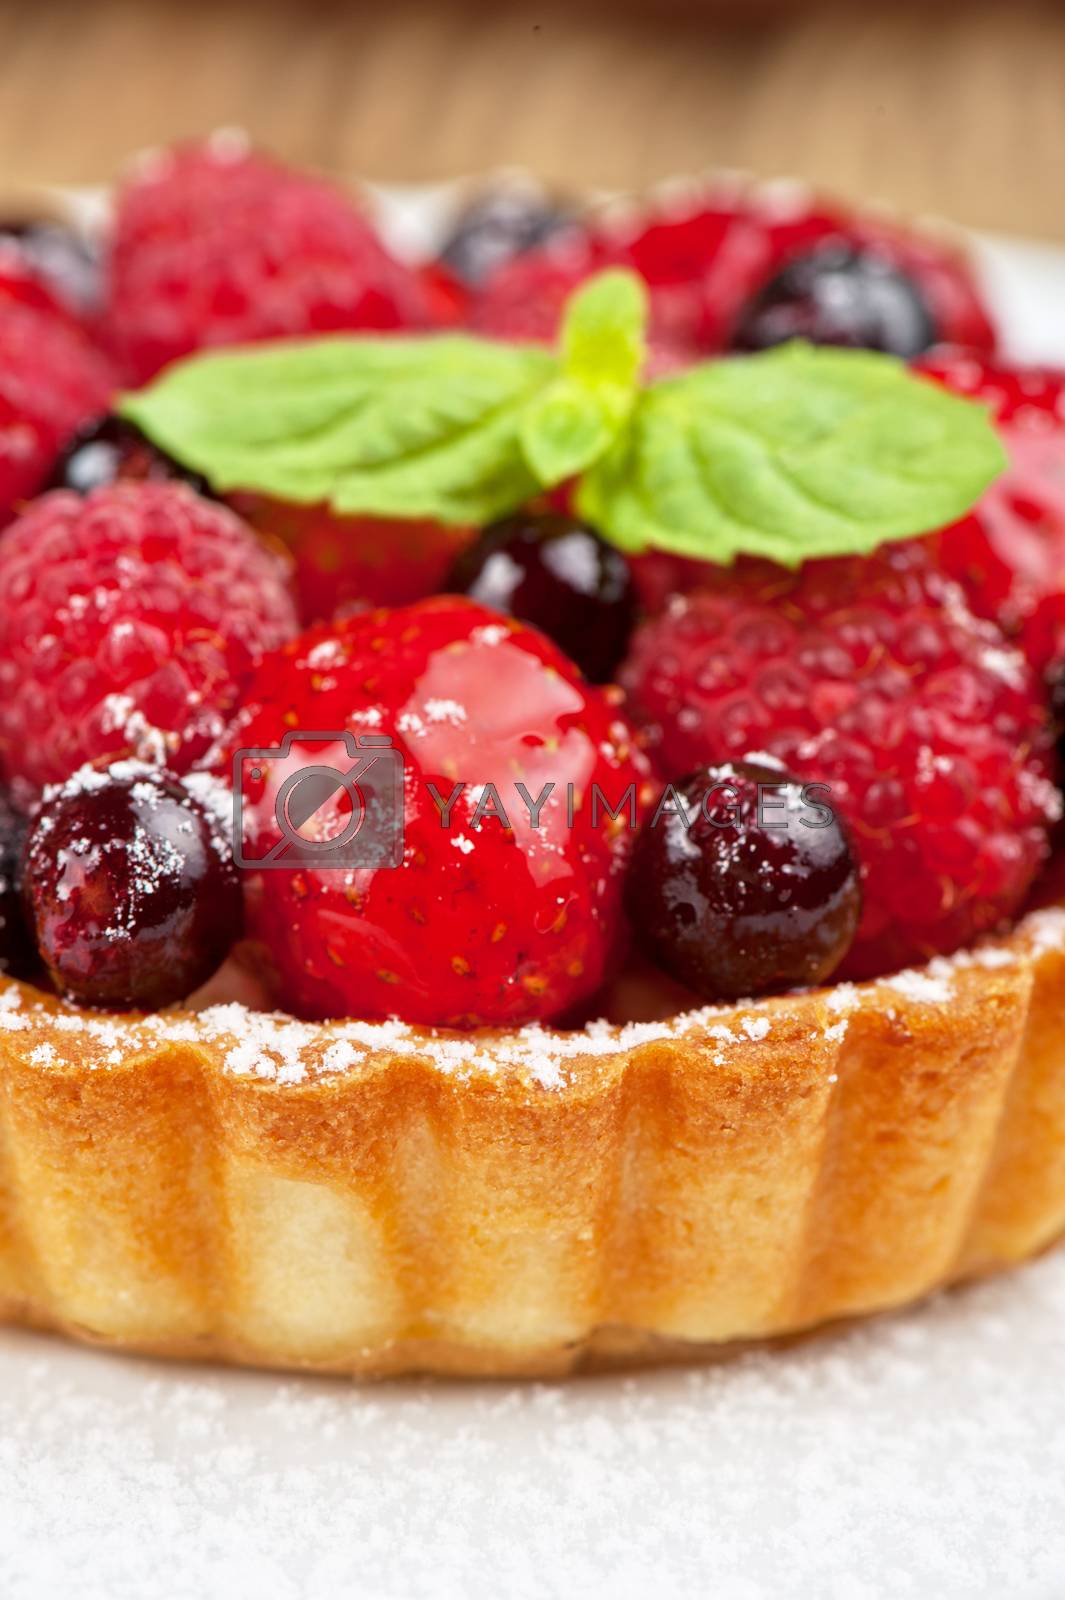 Royalty free image of Cake with fresh berries by rusak